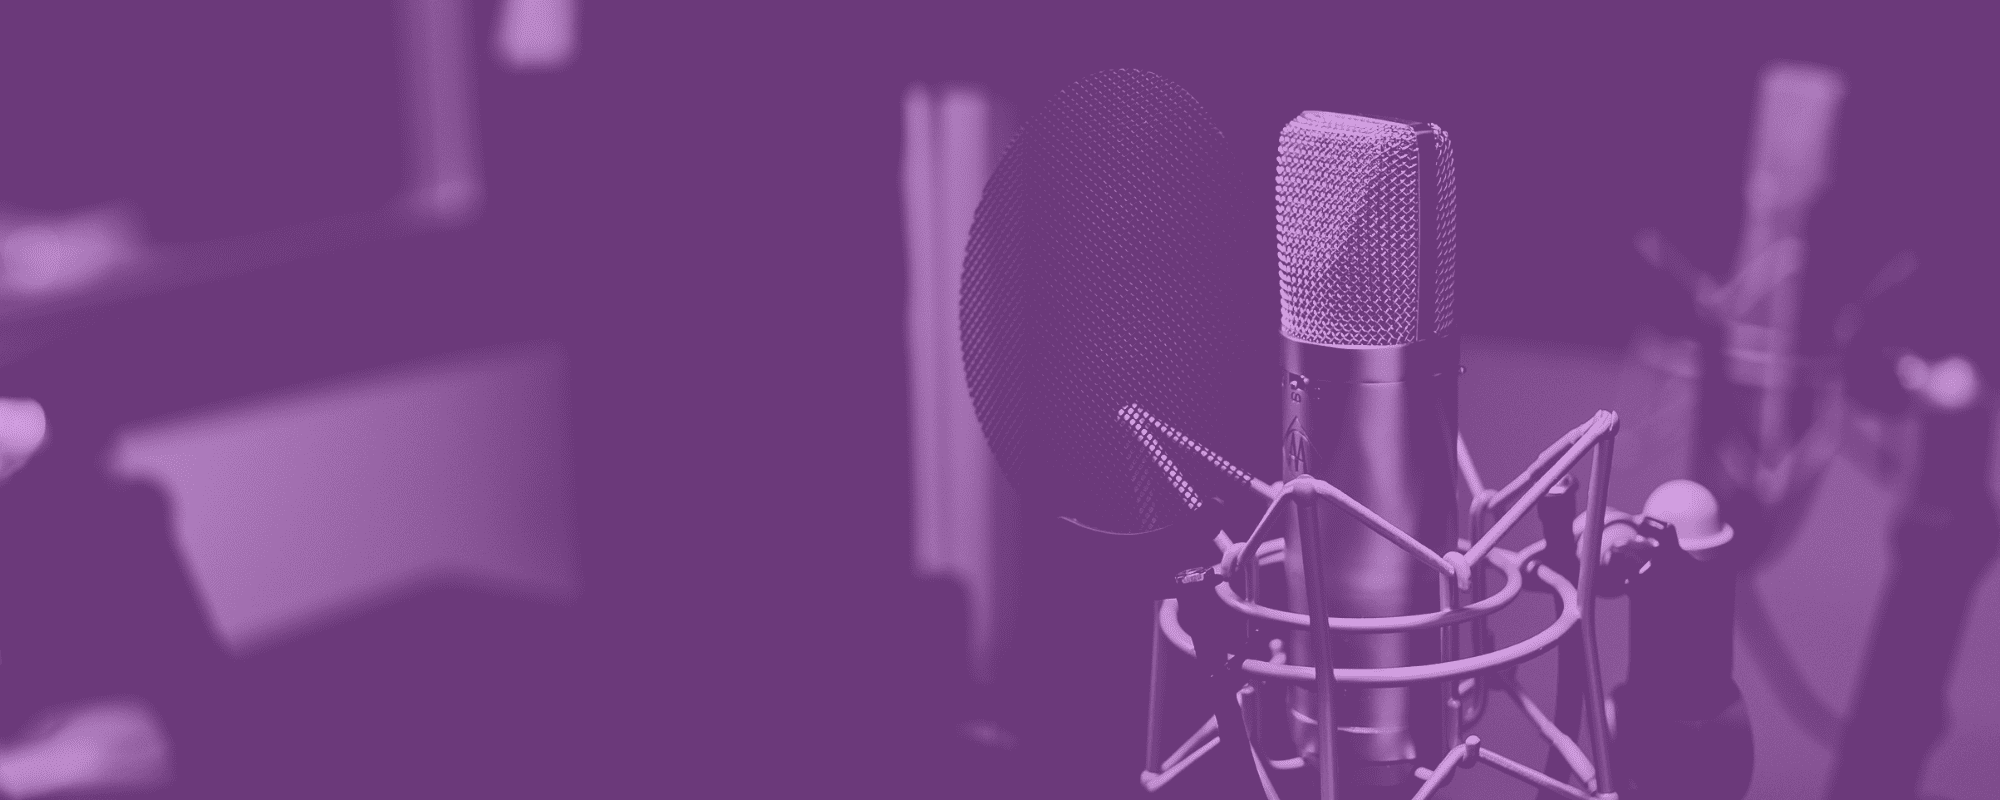 How To Use Podcasts And Events As Marketing Tools